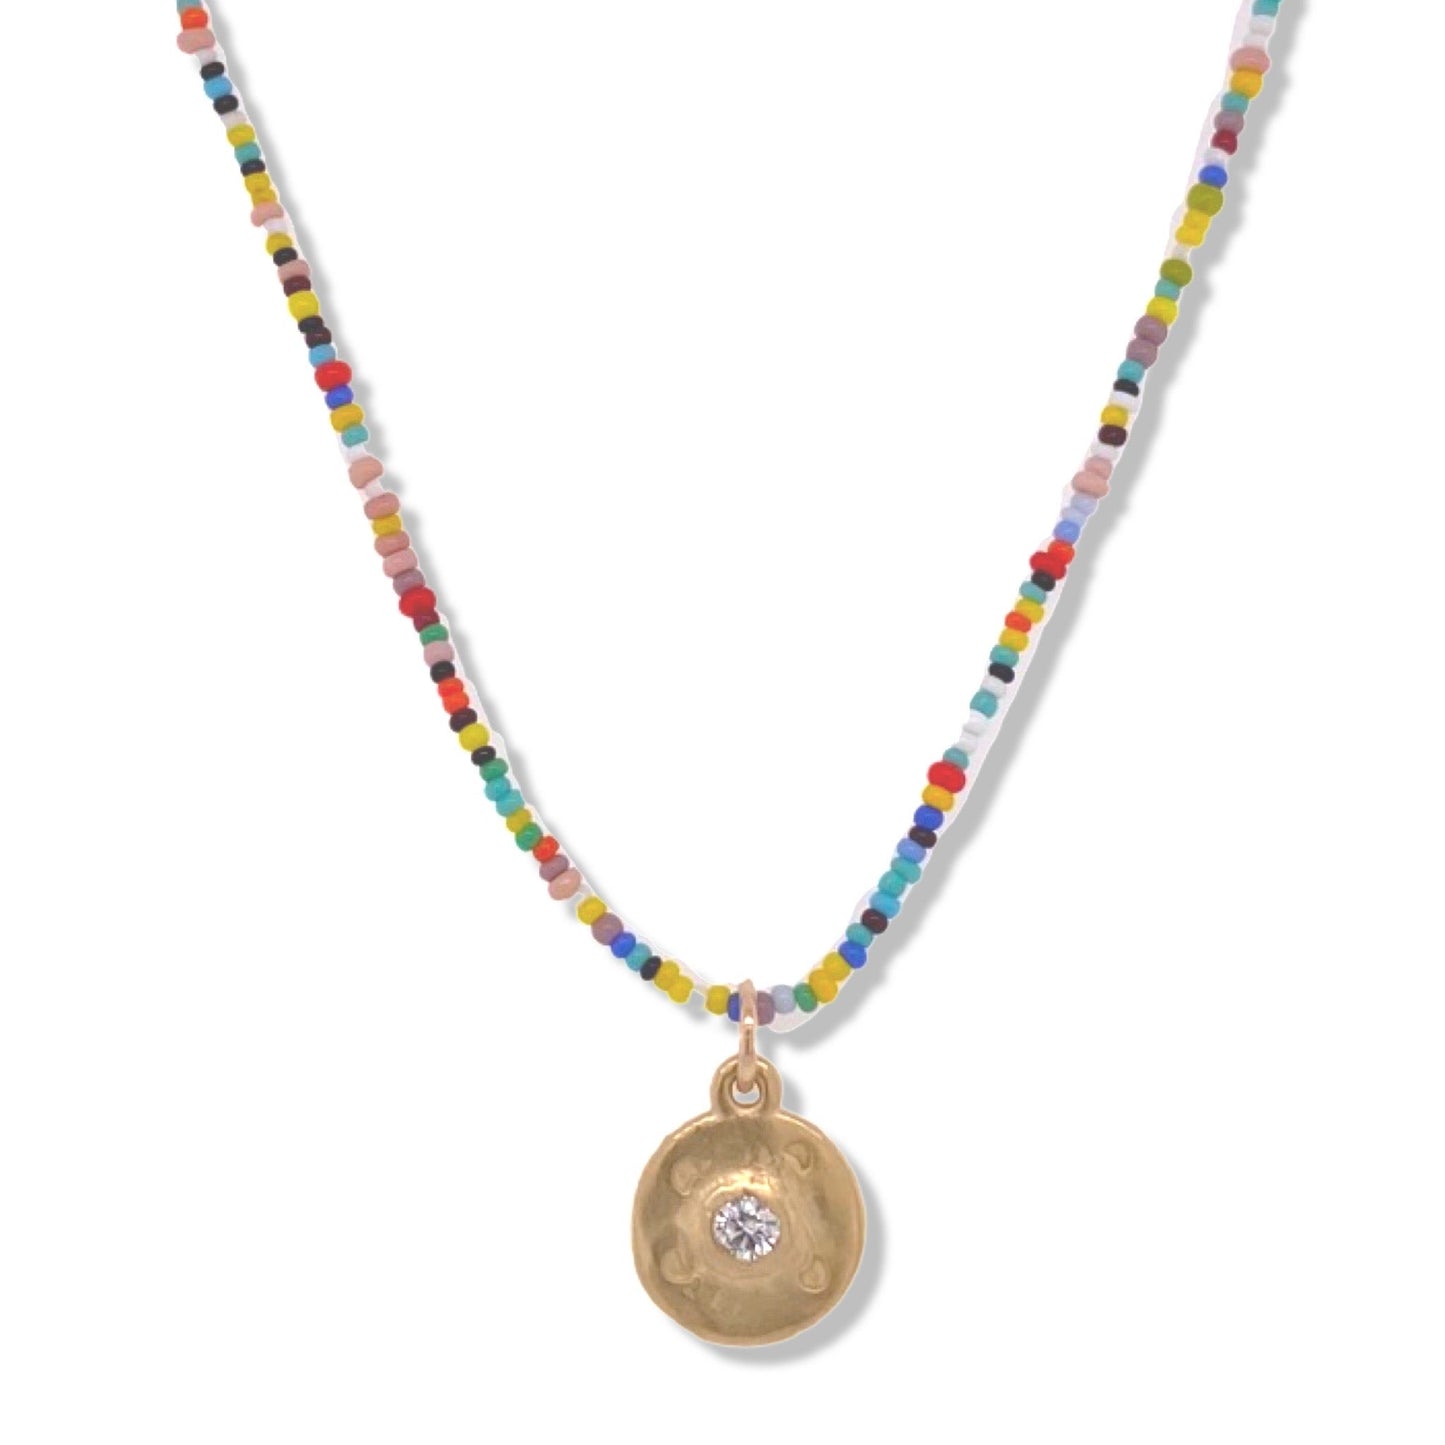 Mini Sparkle Necklace in Gold on Multi Color Beads | Nalu | Nantucket